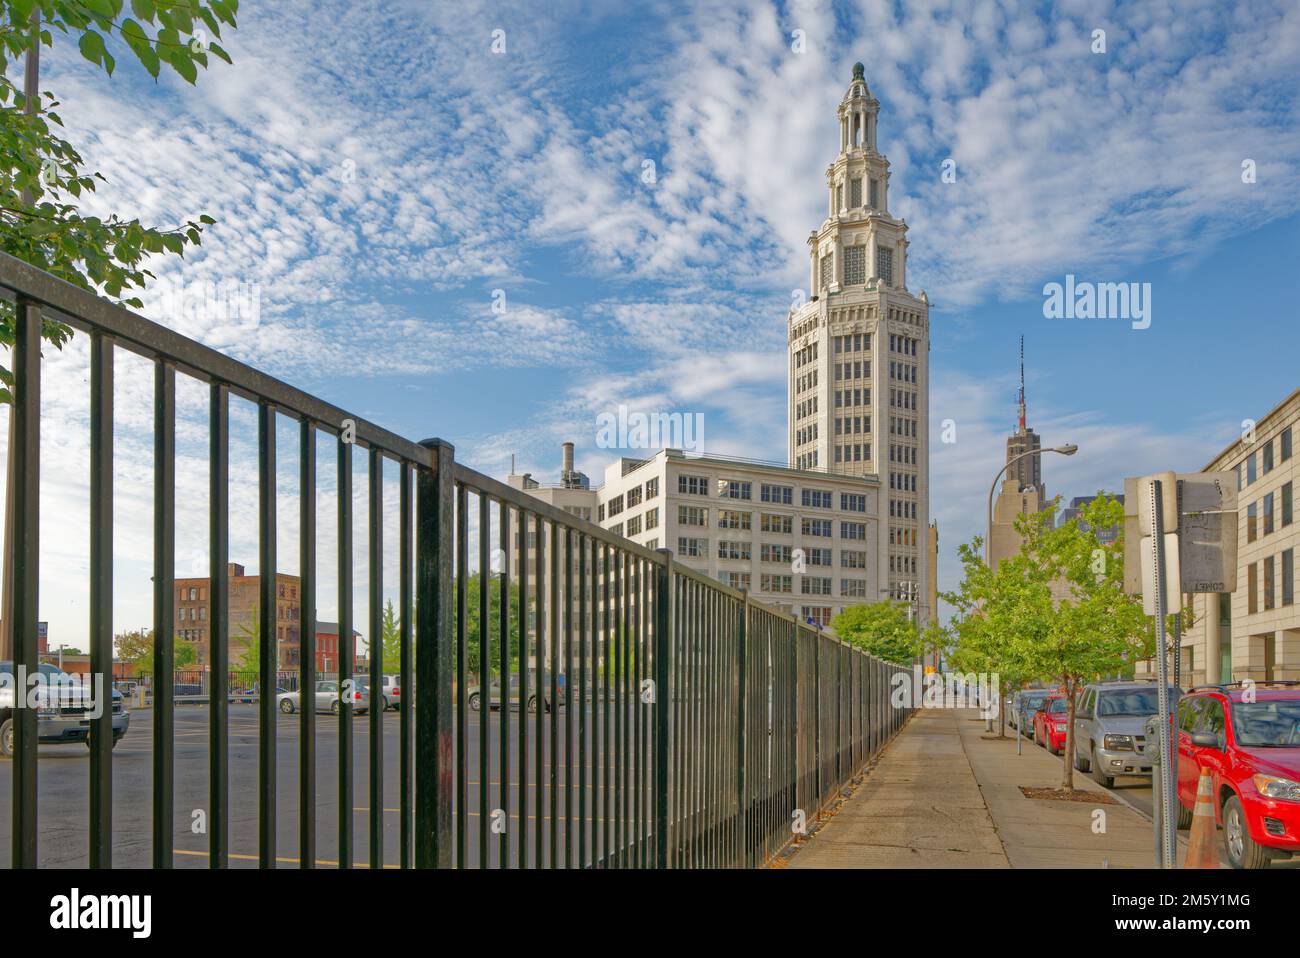 The landmark Electric Tower is clad in white terra cotta, and is one of Buffalo’s tallest buildings. Stock Photo